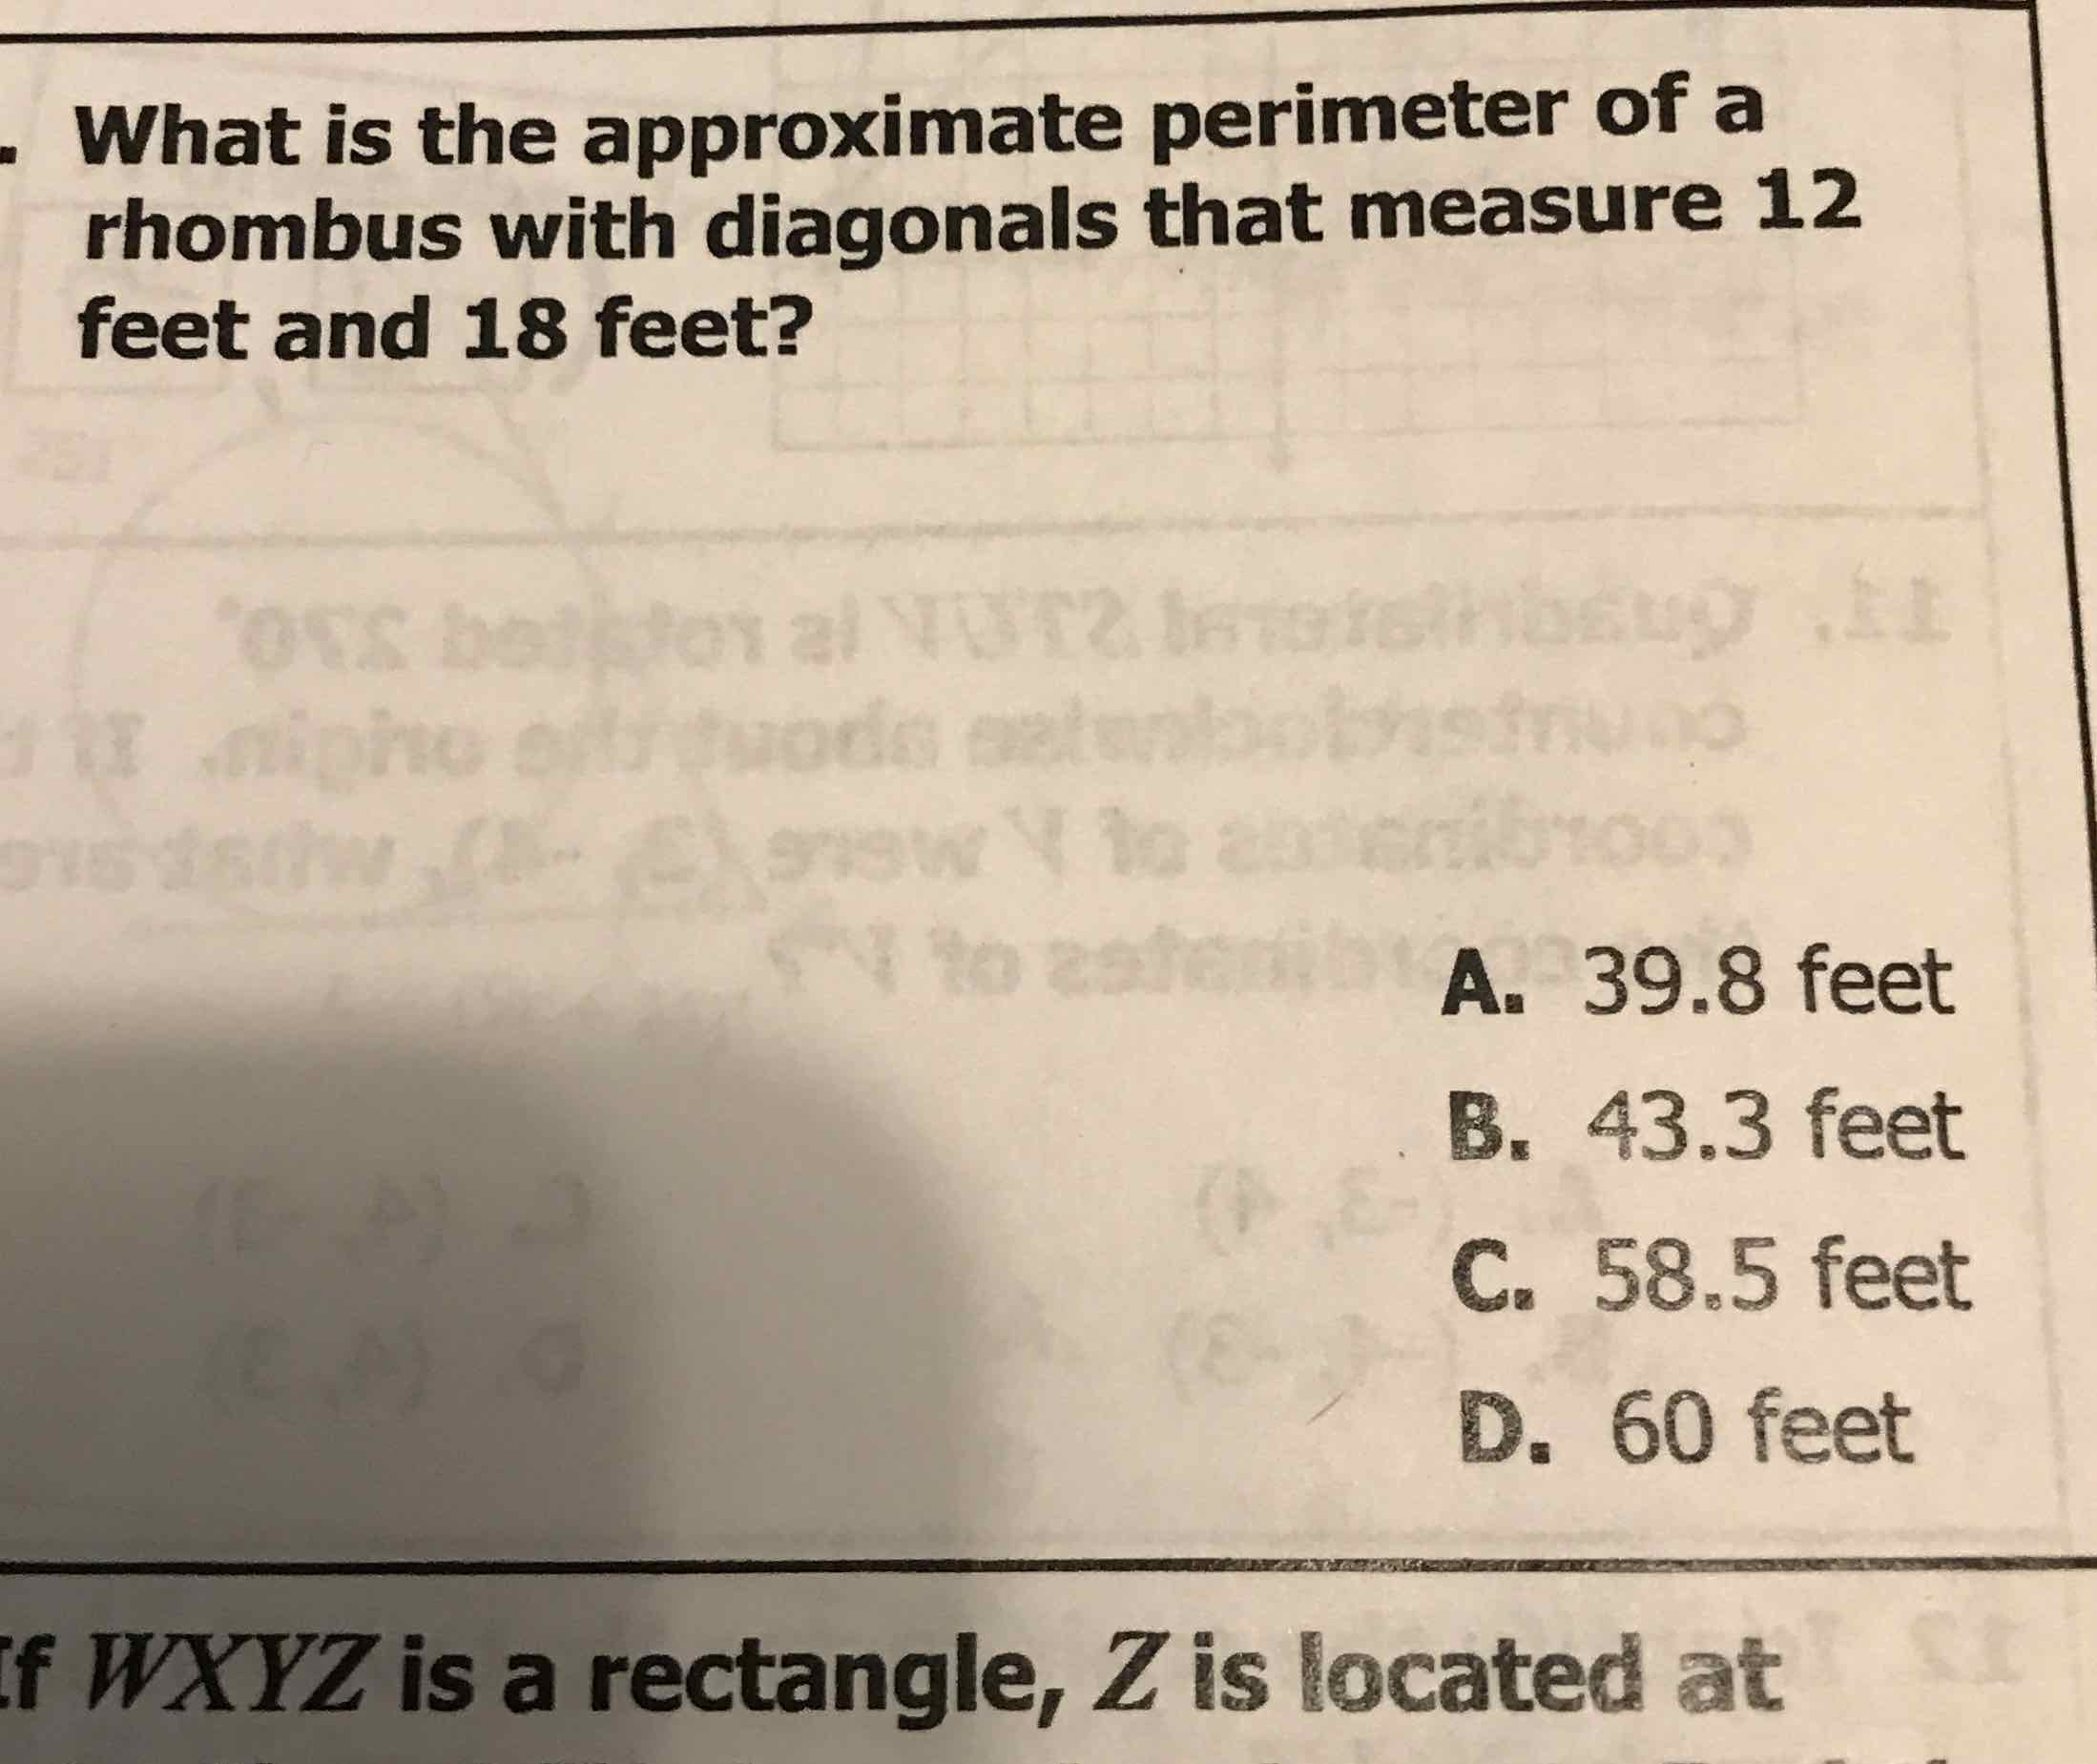 What is the approximate perimeter of a rhombus with diagonals that measure 12 feet and 18 feet?

A. \( 39.8 \) feet
B. \( 43.3 \) feet
C. \( 58.5 \) feet
D. 60 feet
f \( W X Y Z \) is a rectangle, \( Z \) is located at